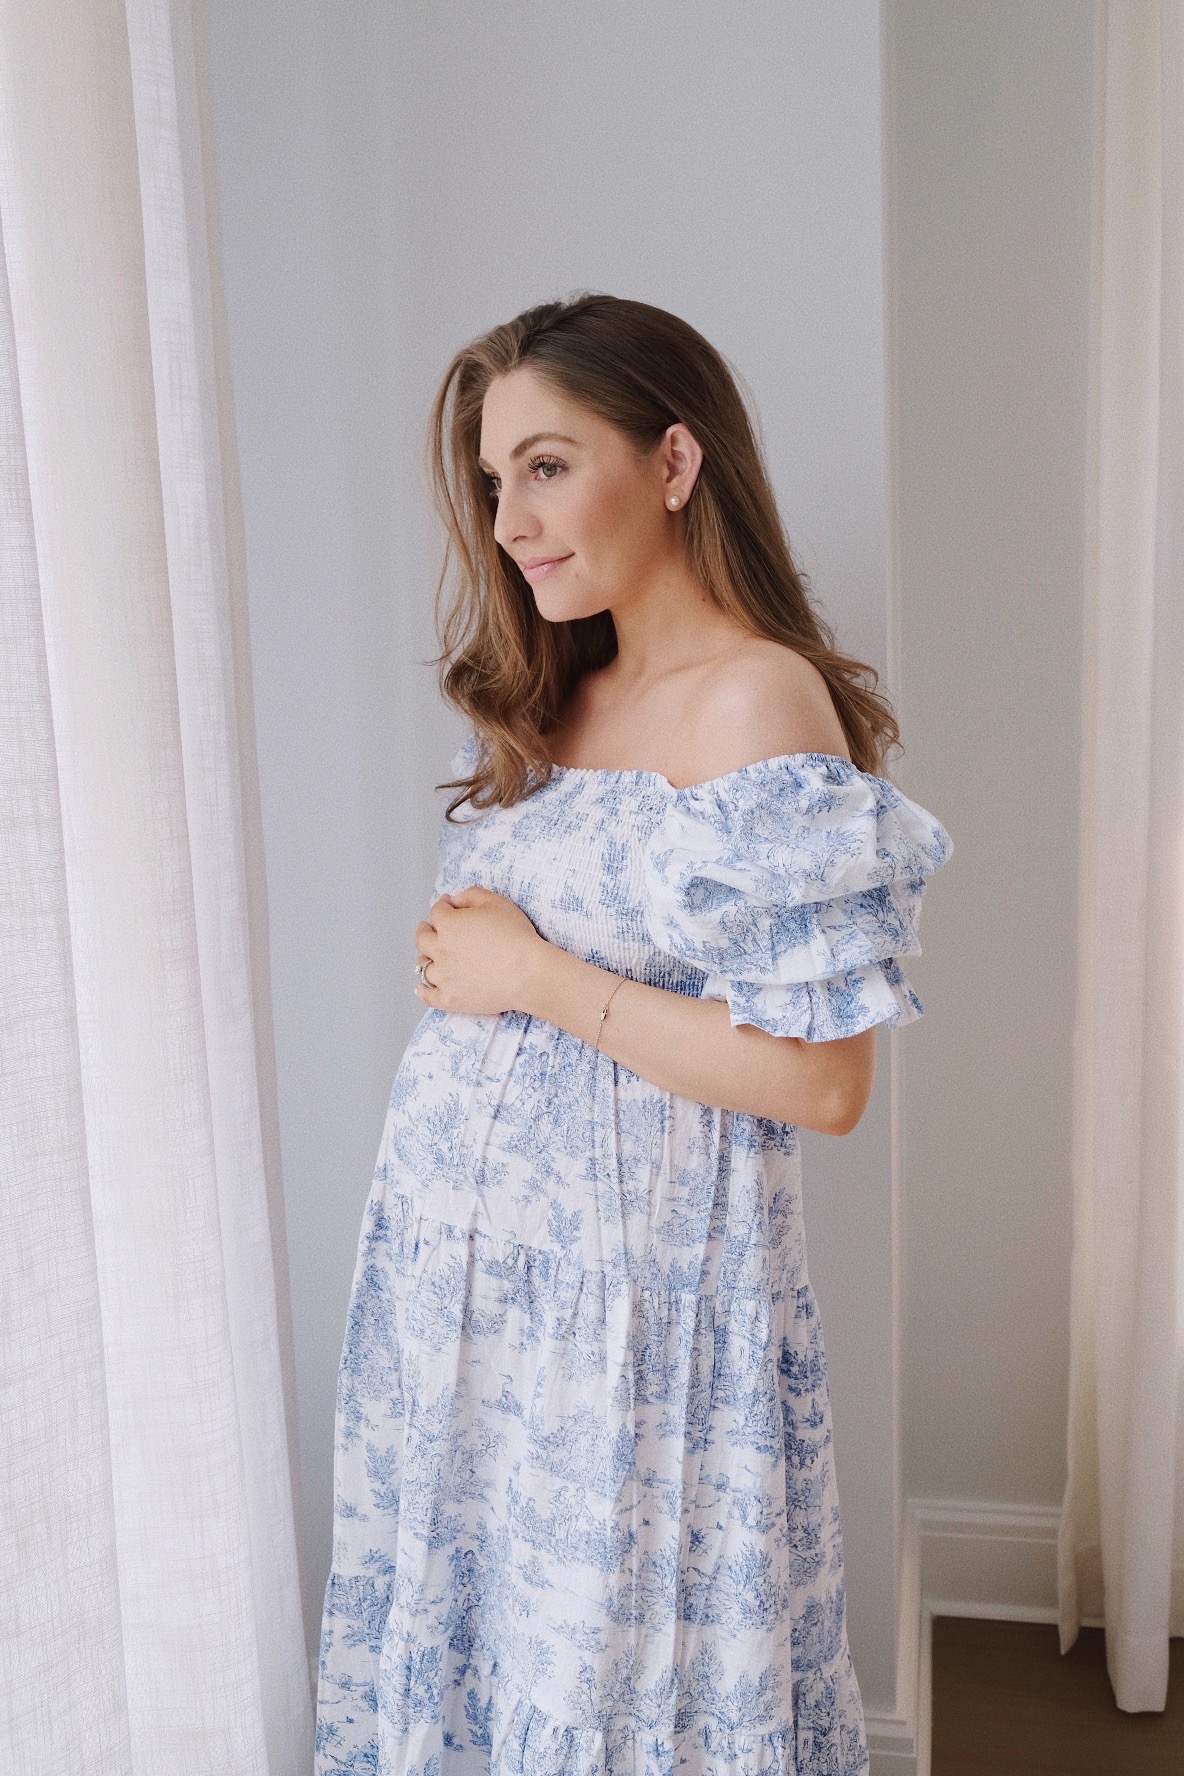 Nothing Fits But Pregnancy Dress | Miss Madeline Rose